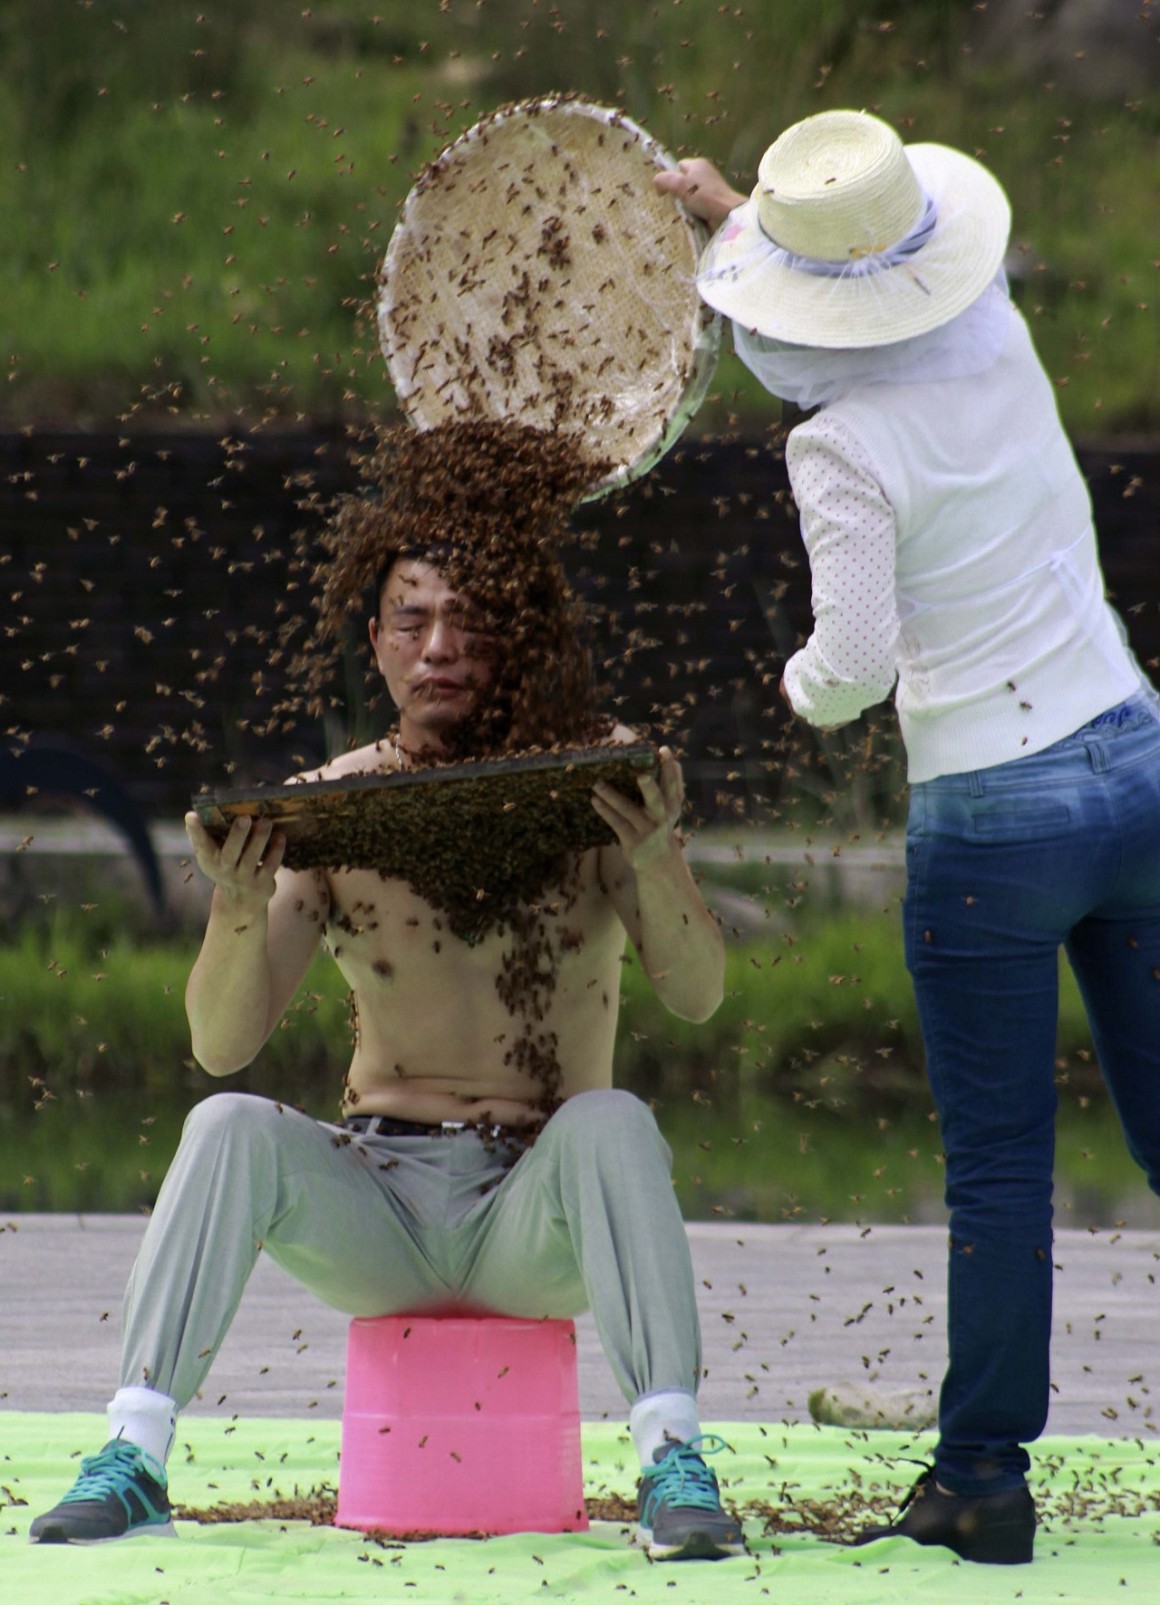 Beekeeper Ruan Liangming closes his eyes as he is covered by a swarm of bees in Yichun